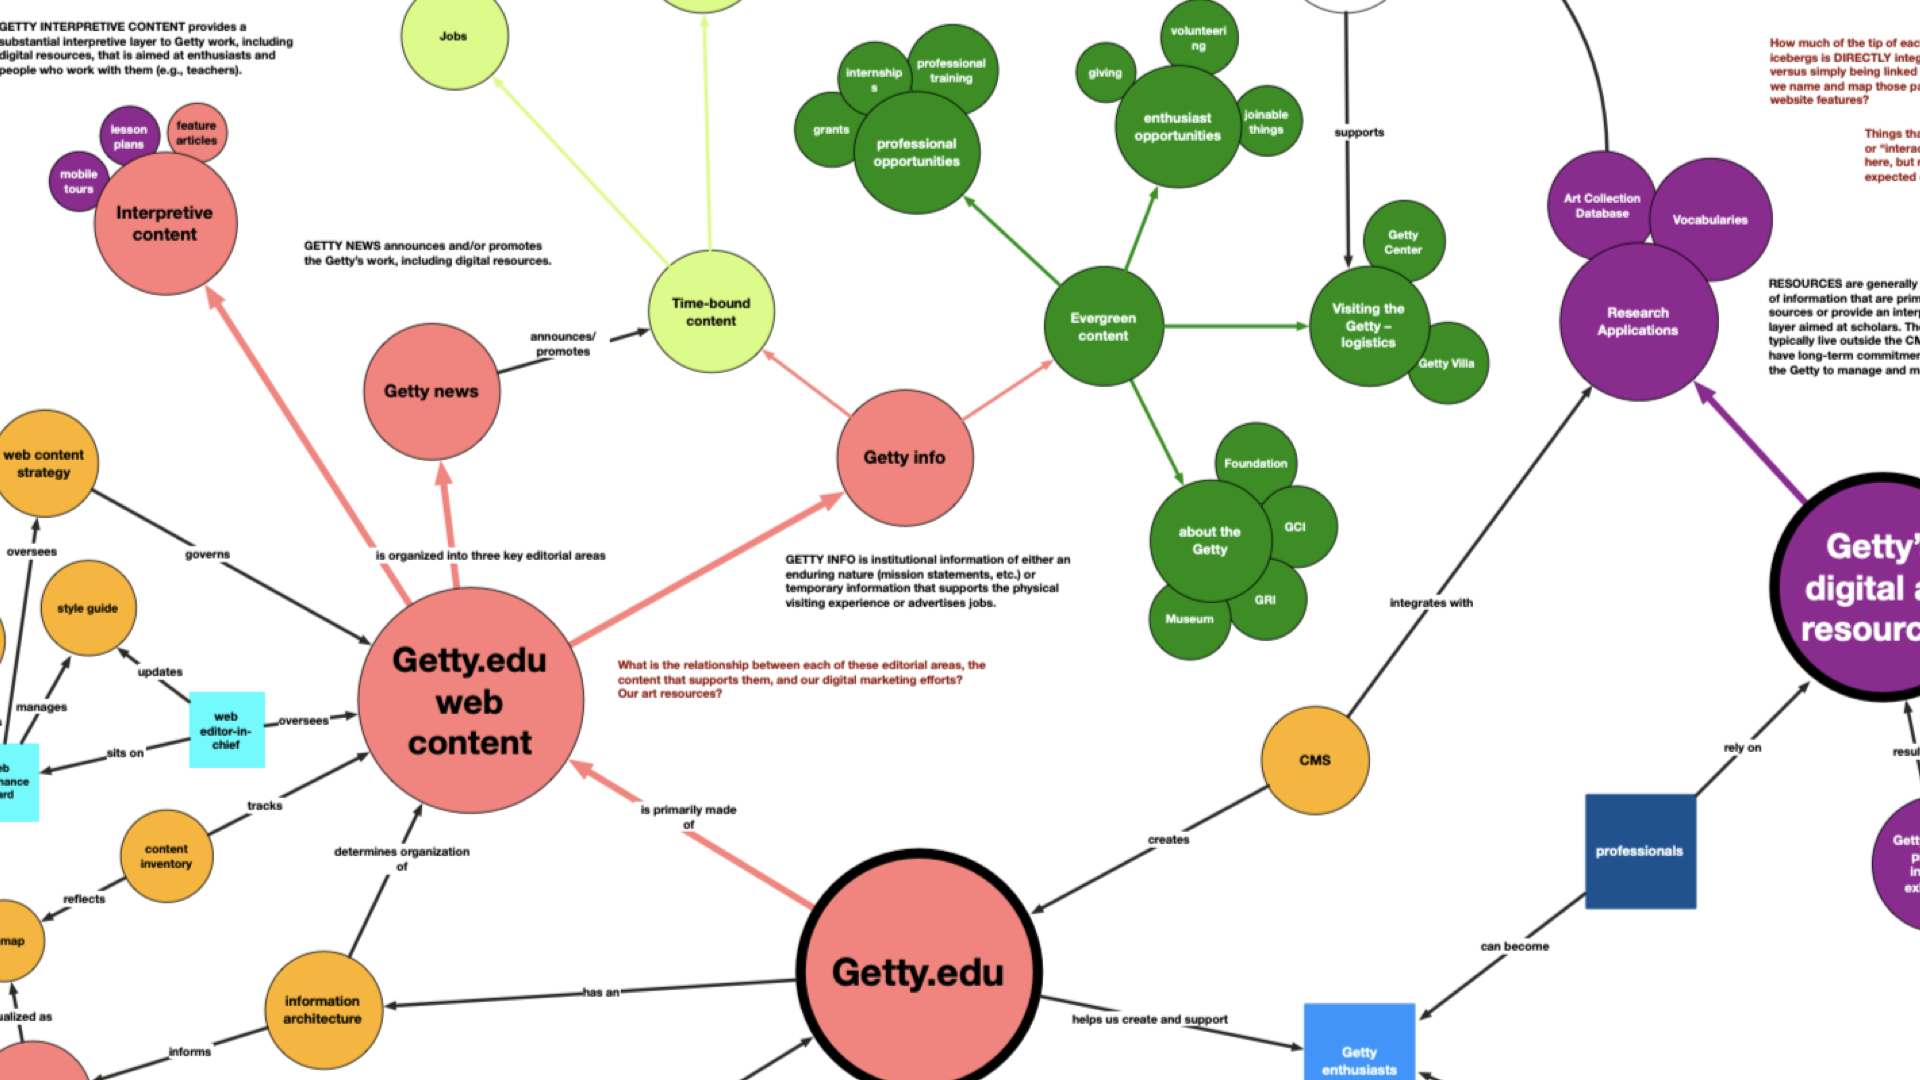 An interconnected bubble diagram, with some of the larger bubbles containing phrases like Getty.edu, Getty info, Getty.edu web content, evergreen content, interpretive content.